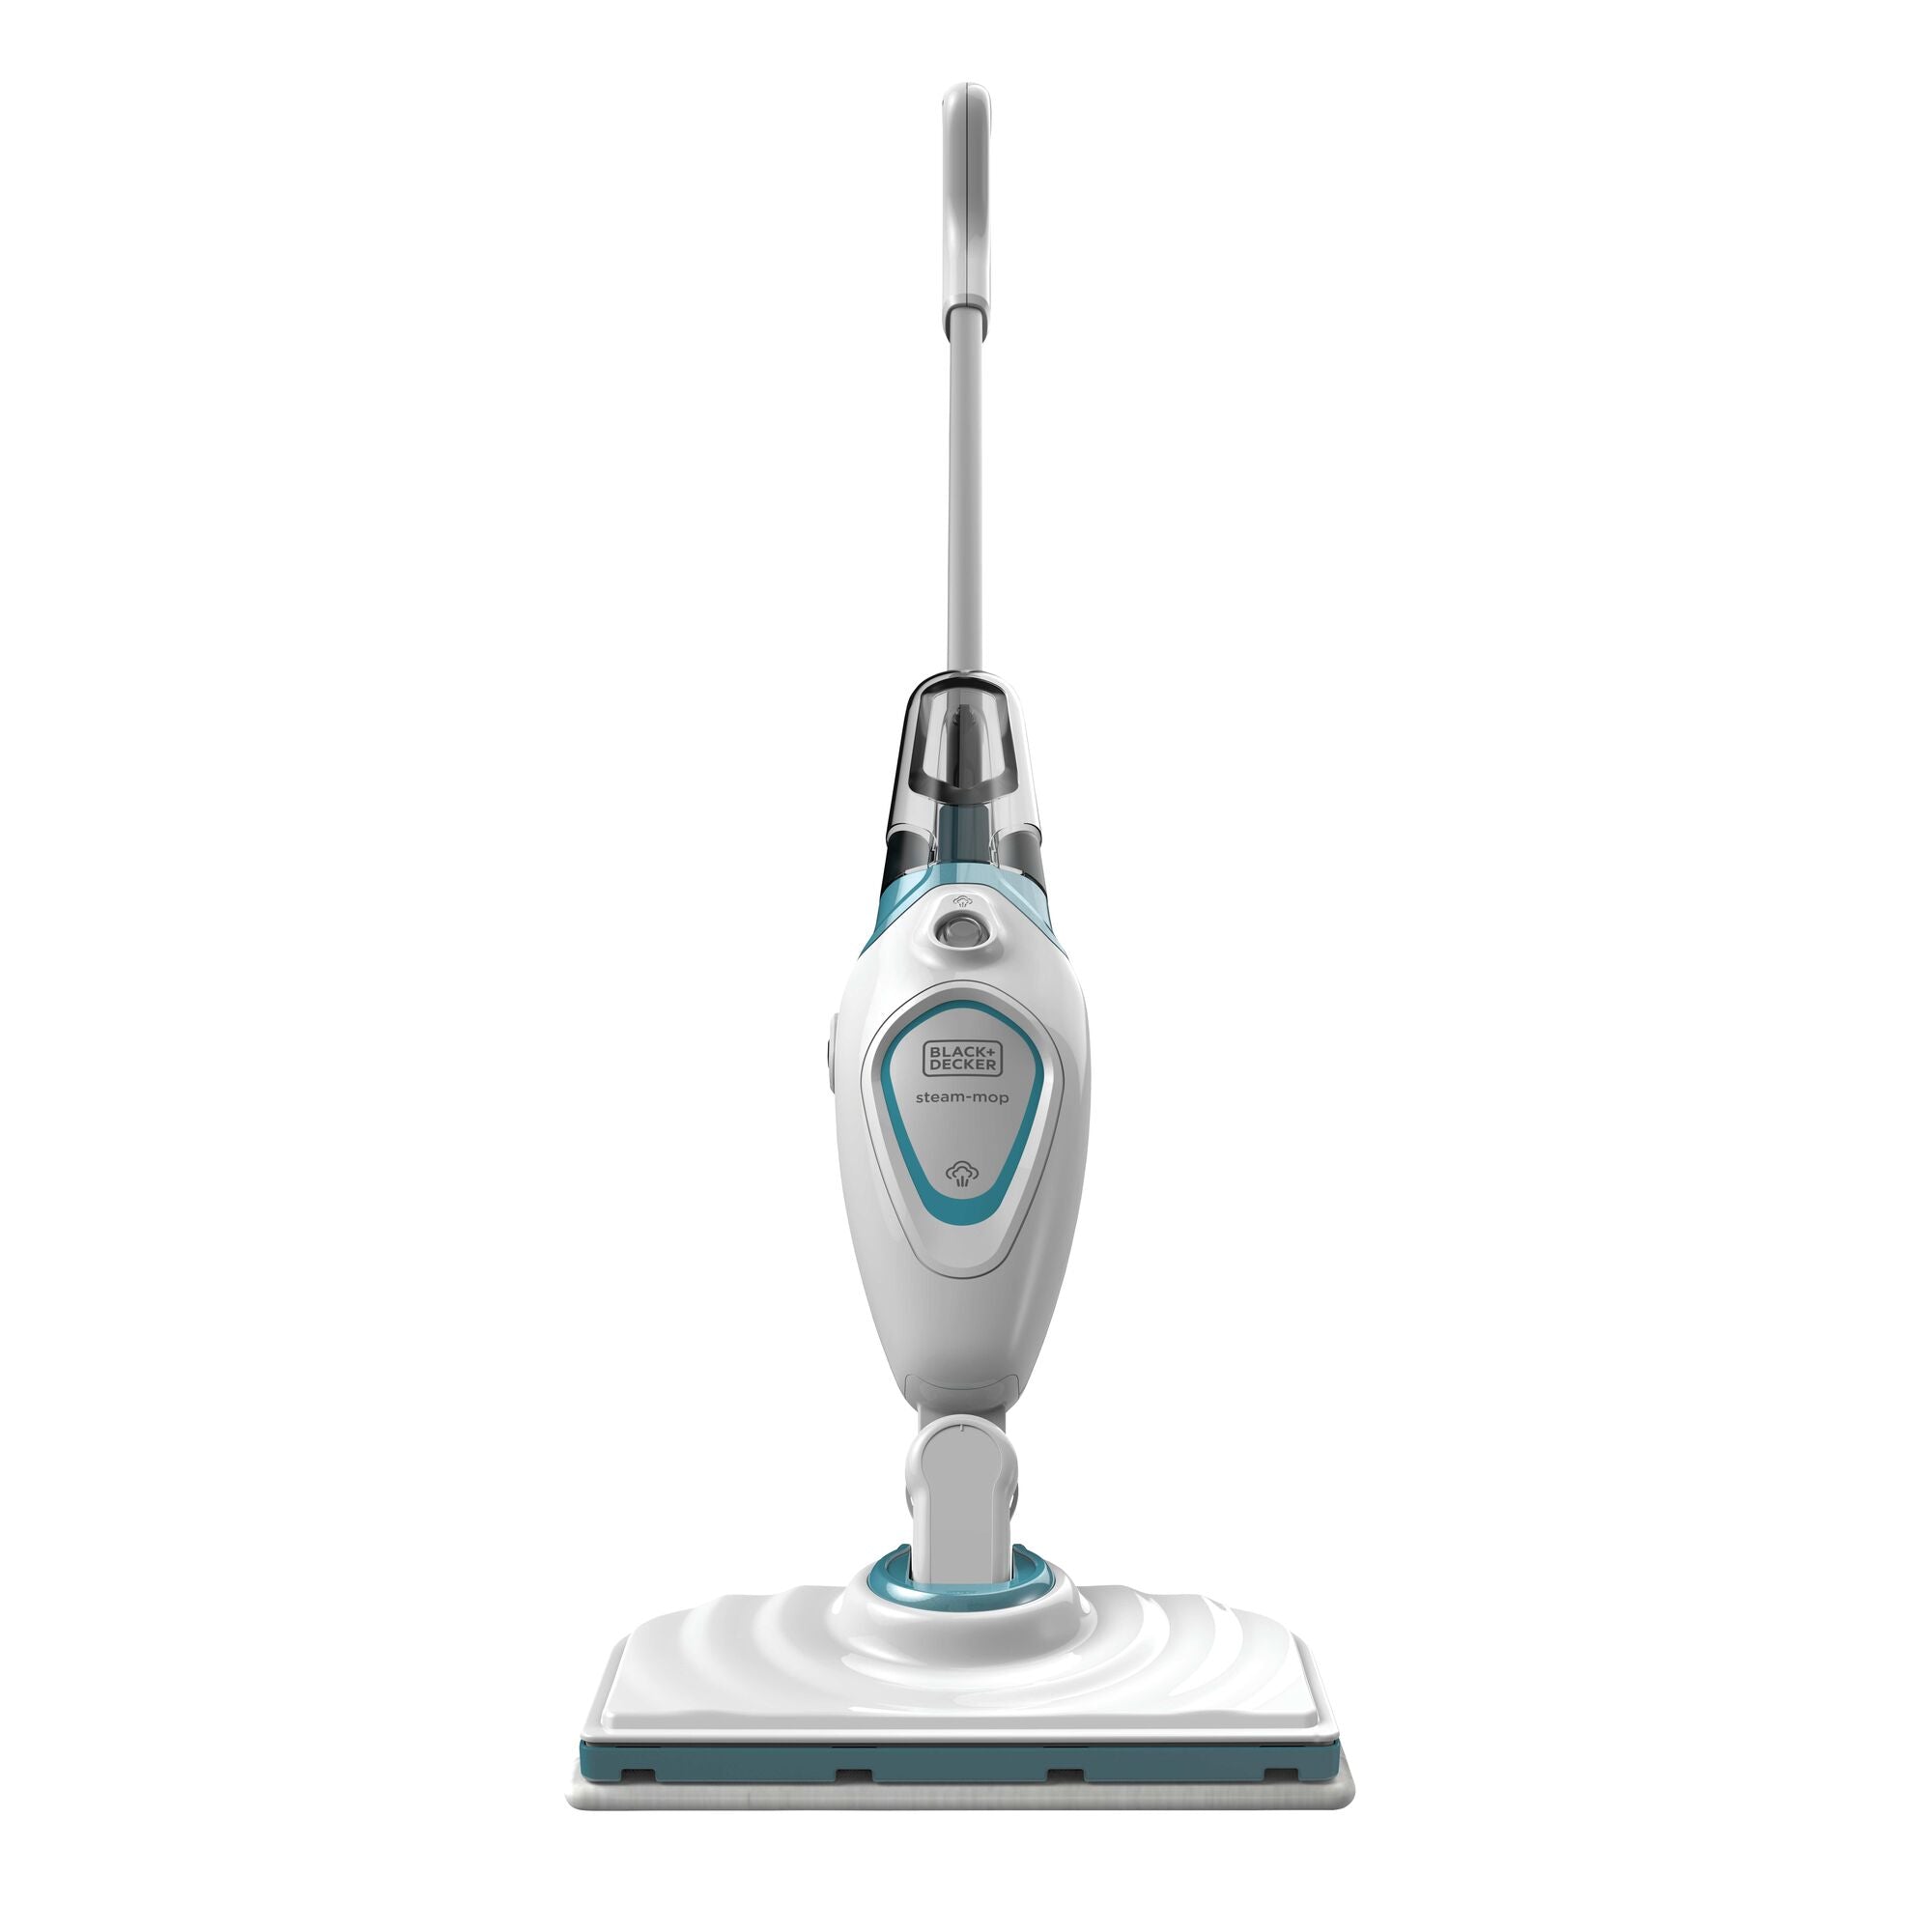 Profile of black and decker steam mop with lift reach head.